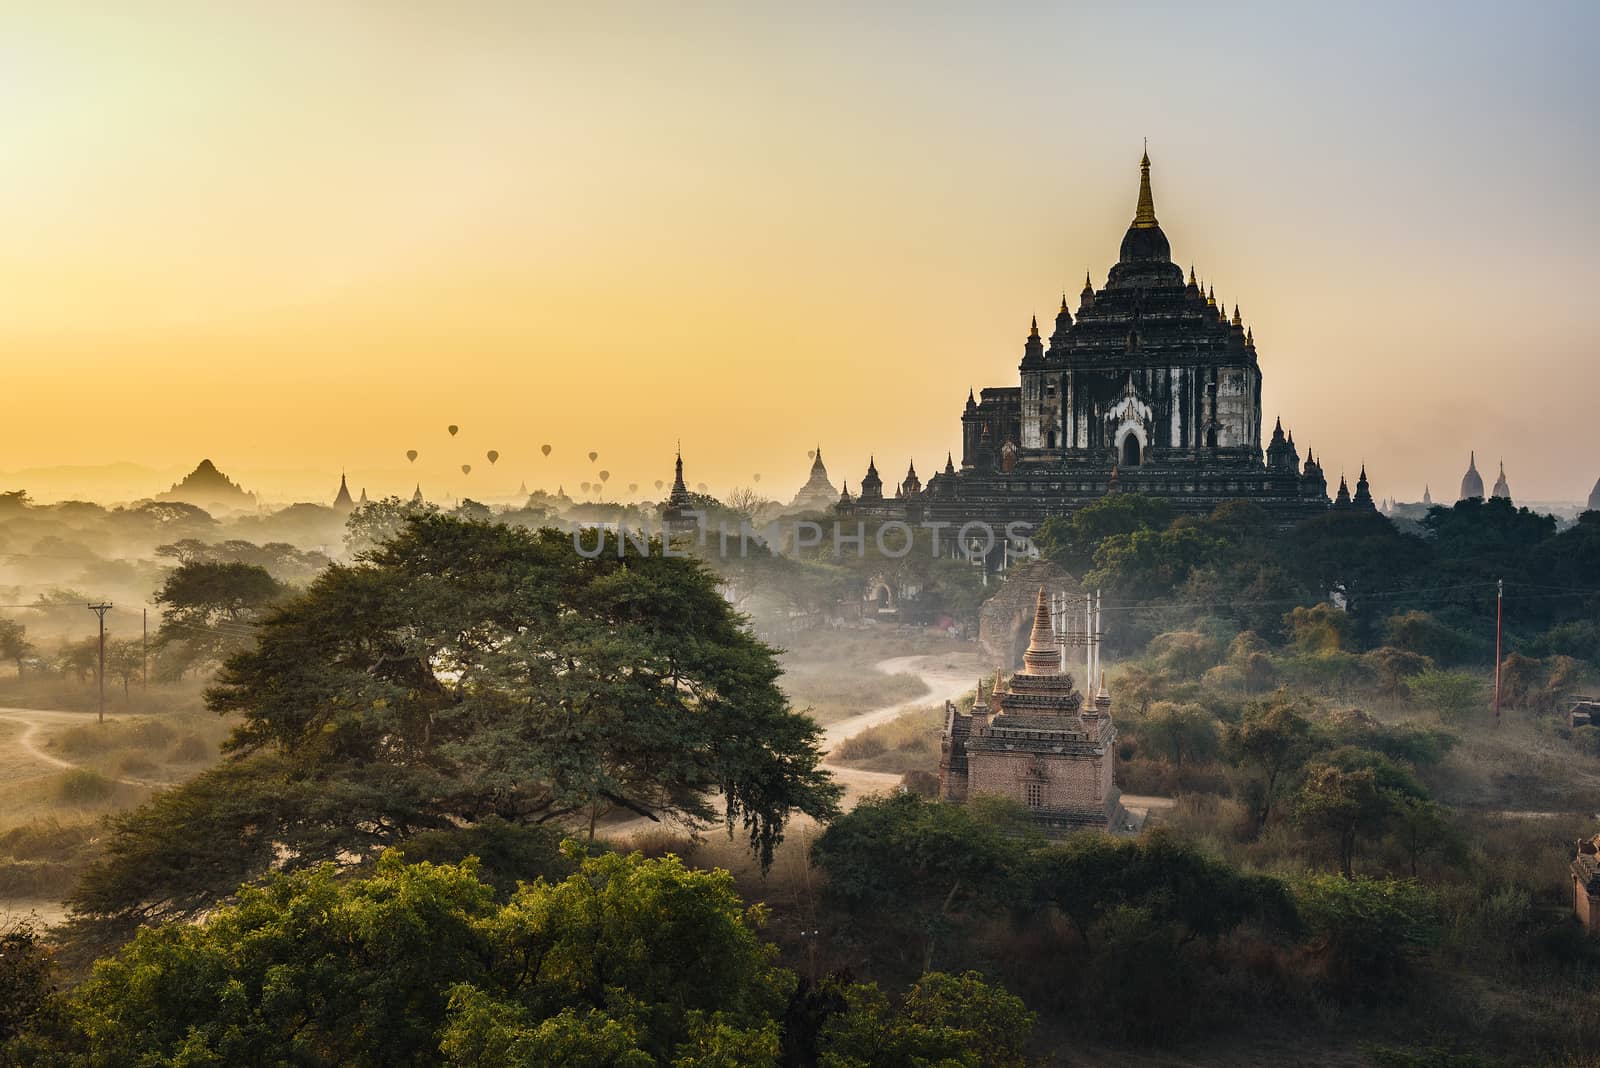 Scenic sunrise with hot air balloons aboveThatbyinnyu temple in Bagan, Myanmar. Bagan is an ancient city with thousands of historic buddhist temples and stupas.